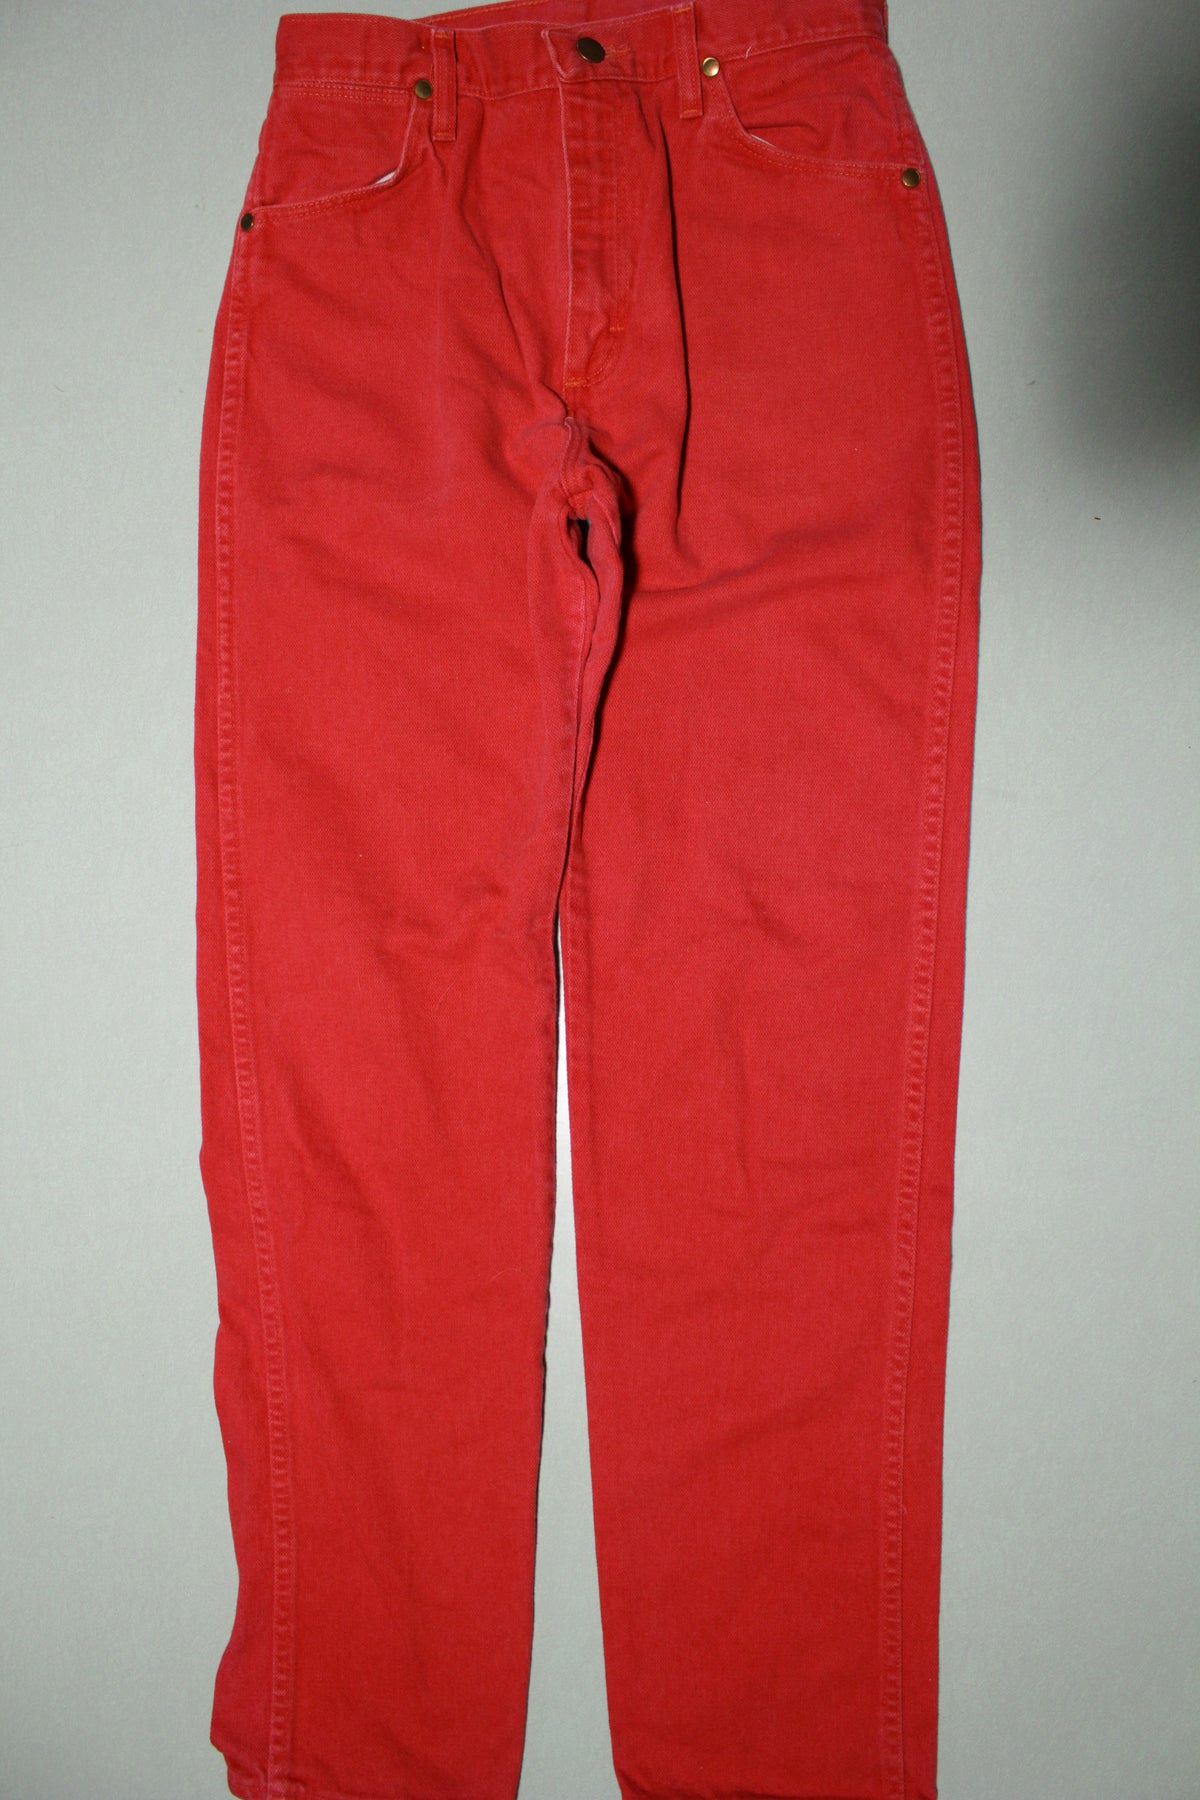 Wrangler Red Vintage 80's Denim Made in USA Cowboy Rodeo Jeans 28x31